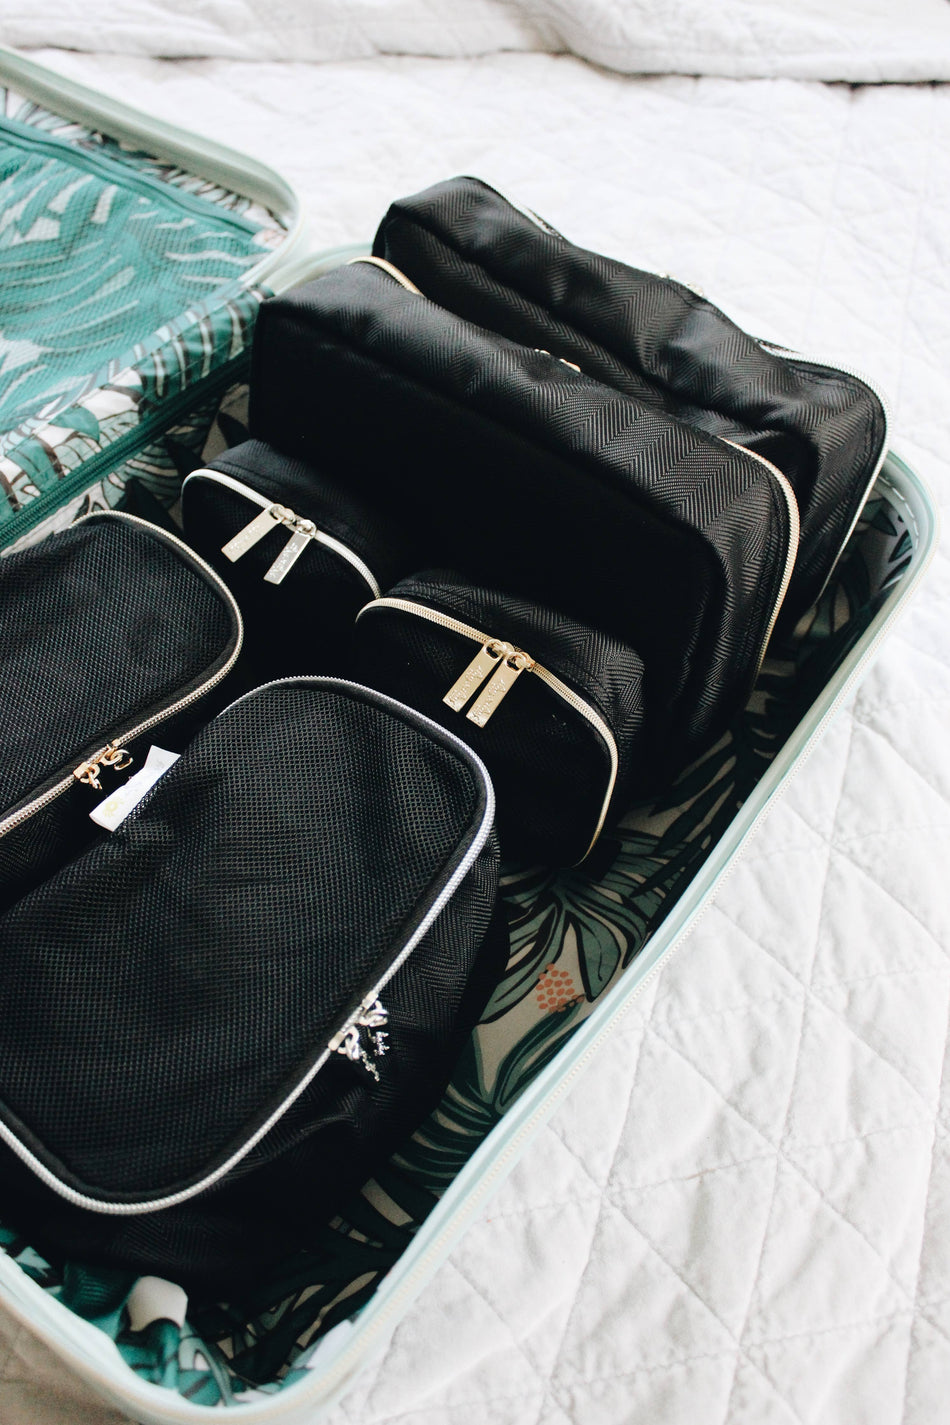 Black & Silver Pack Like a Boss™ Packing Cubes